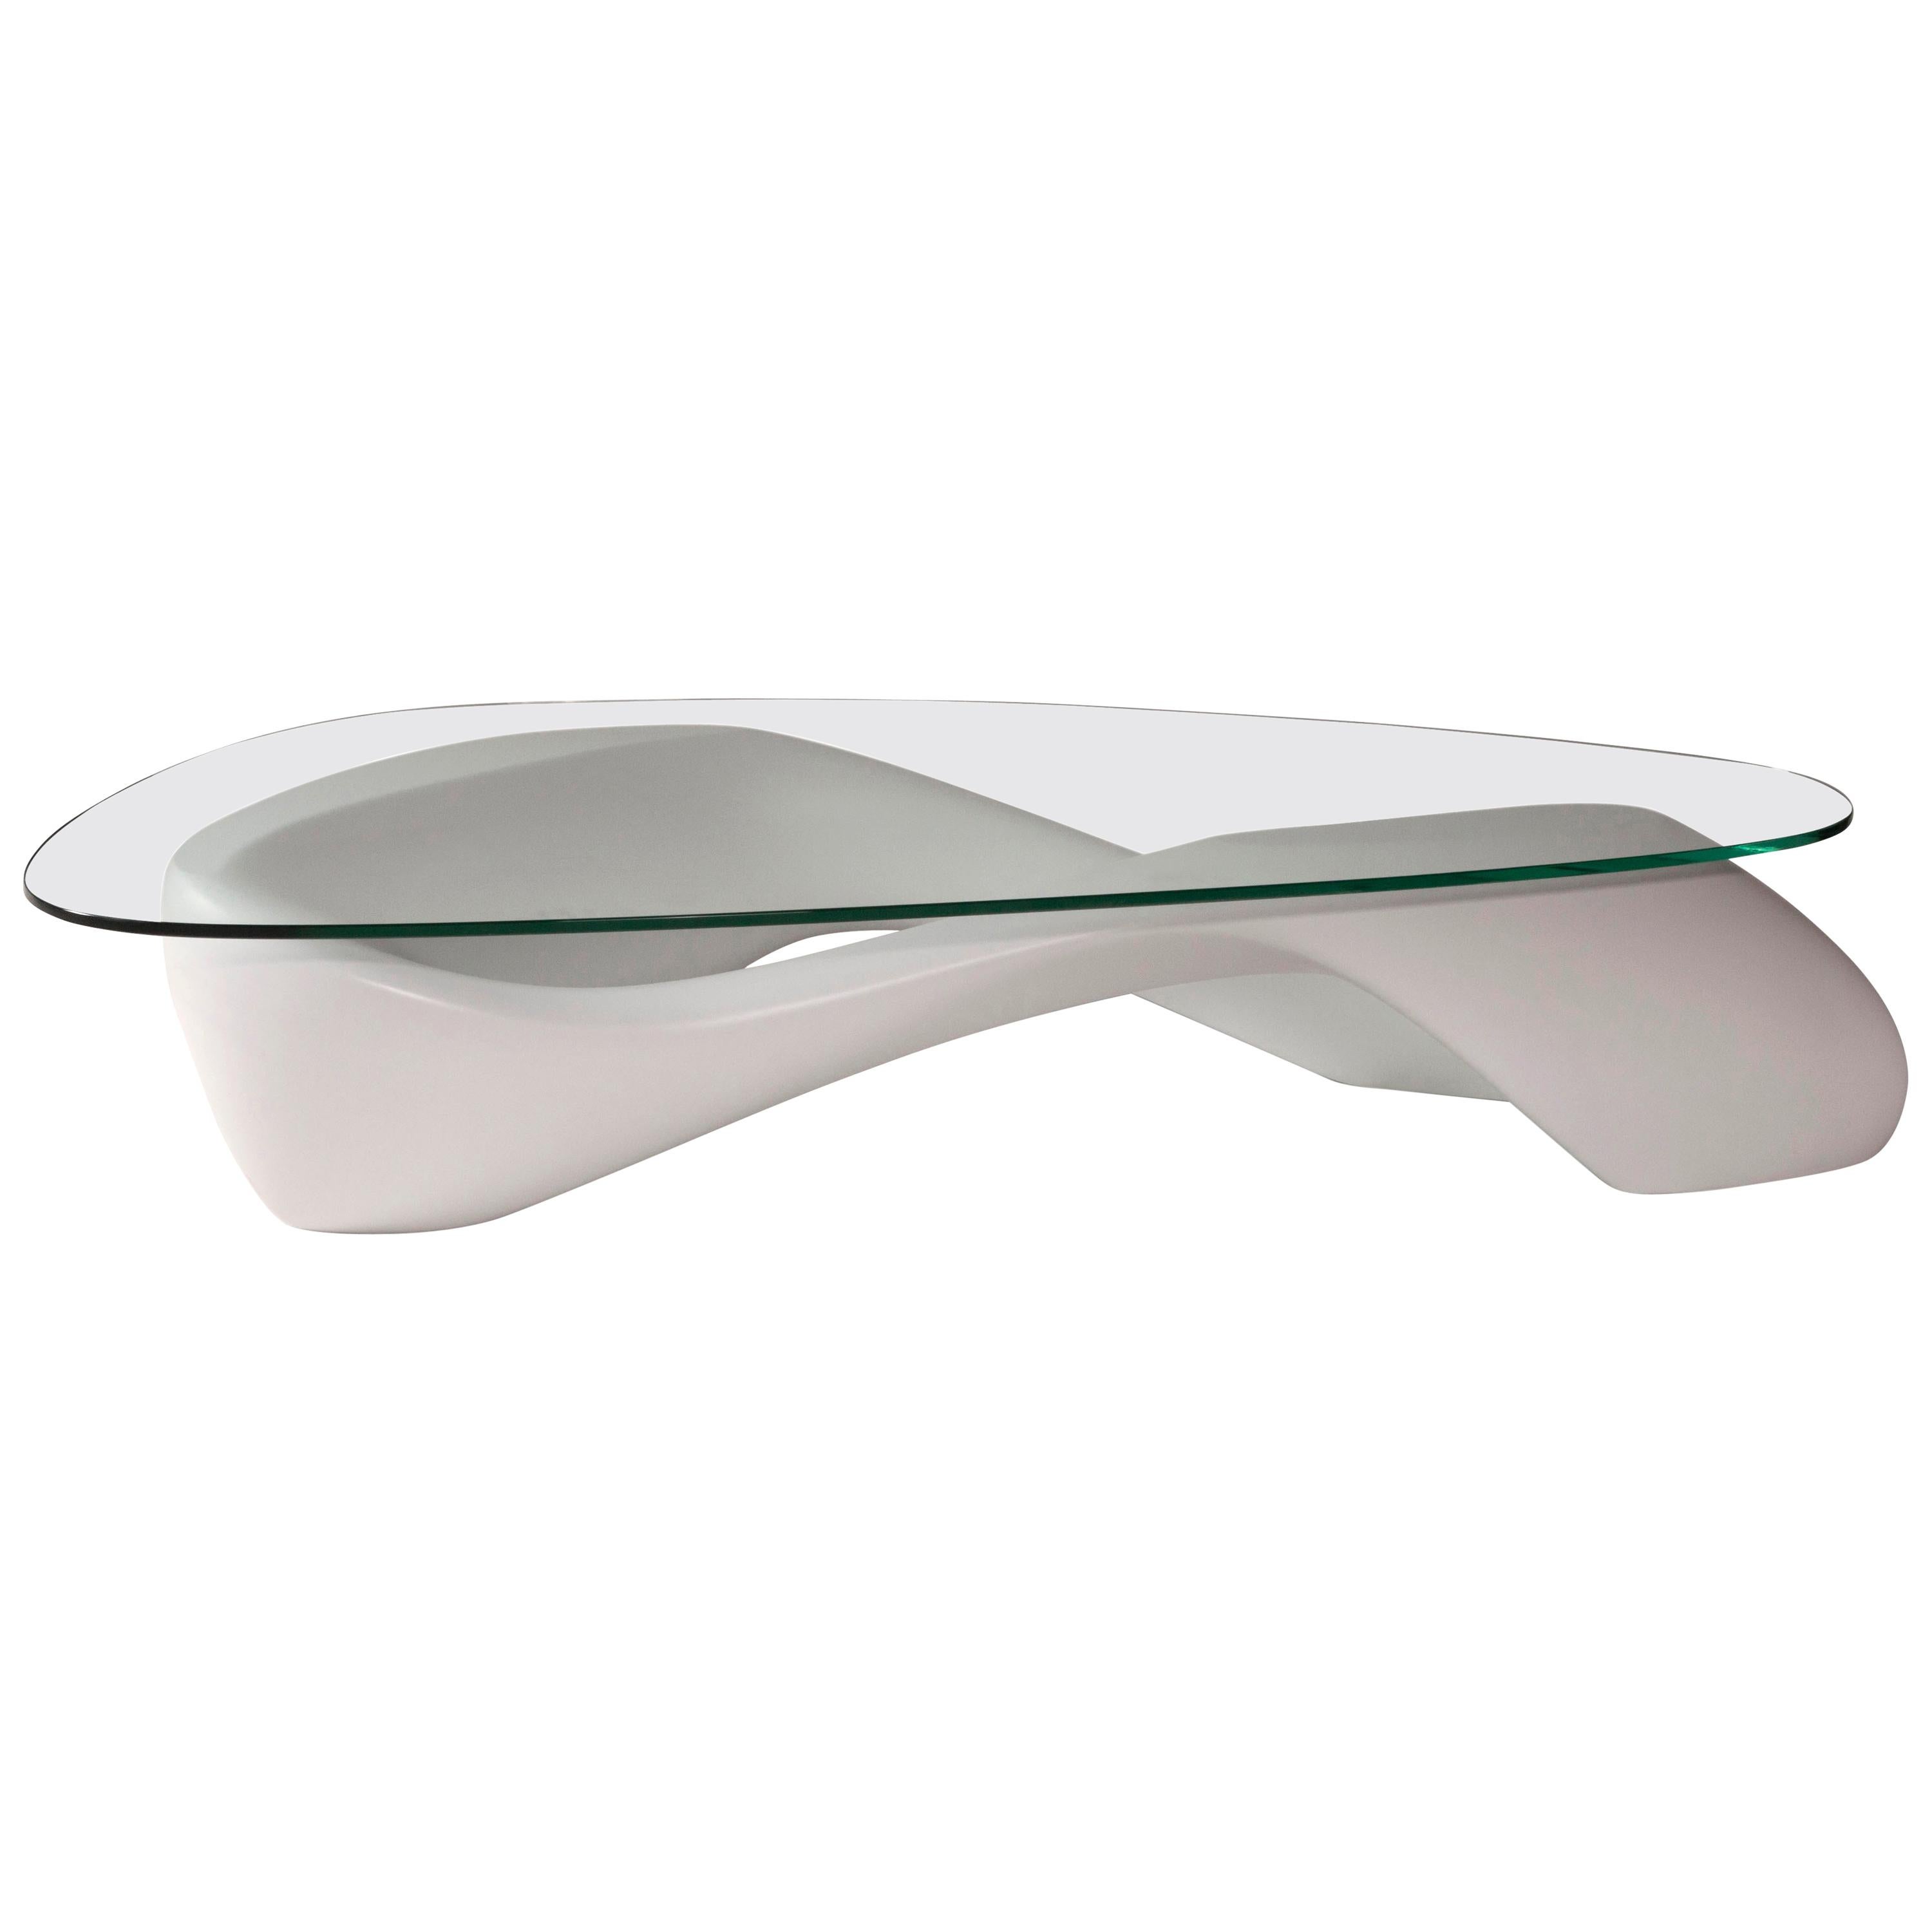 Amorph Lust Coffee Table White with Organic Glass For Sale